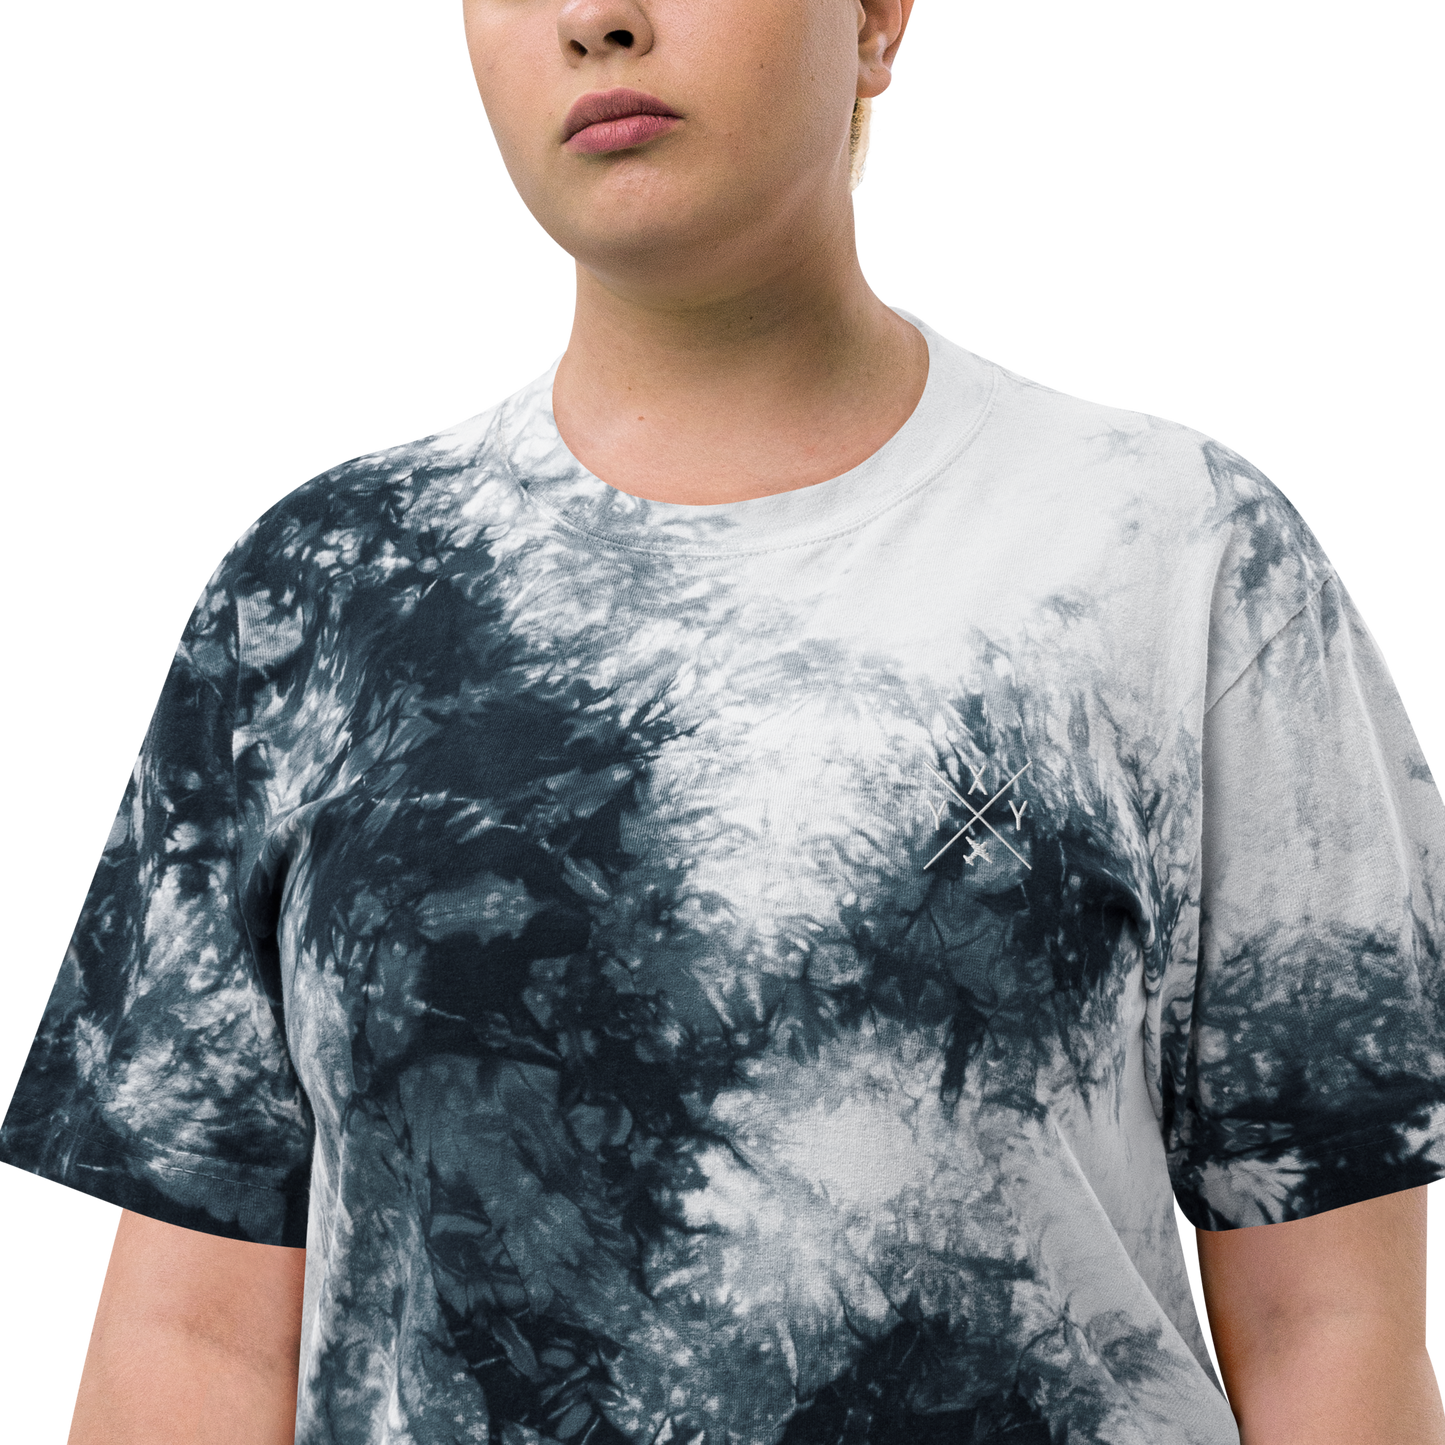 YHM Designs - YXY Whitehorse Oversized Tie-Dye T-Shirt - Crossed-X Design with Airport Code and Vintage Propliner - White Embroidery - Image 18